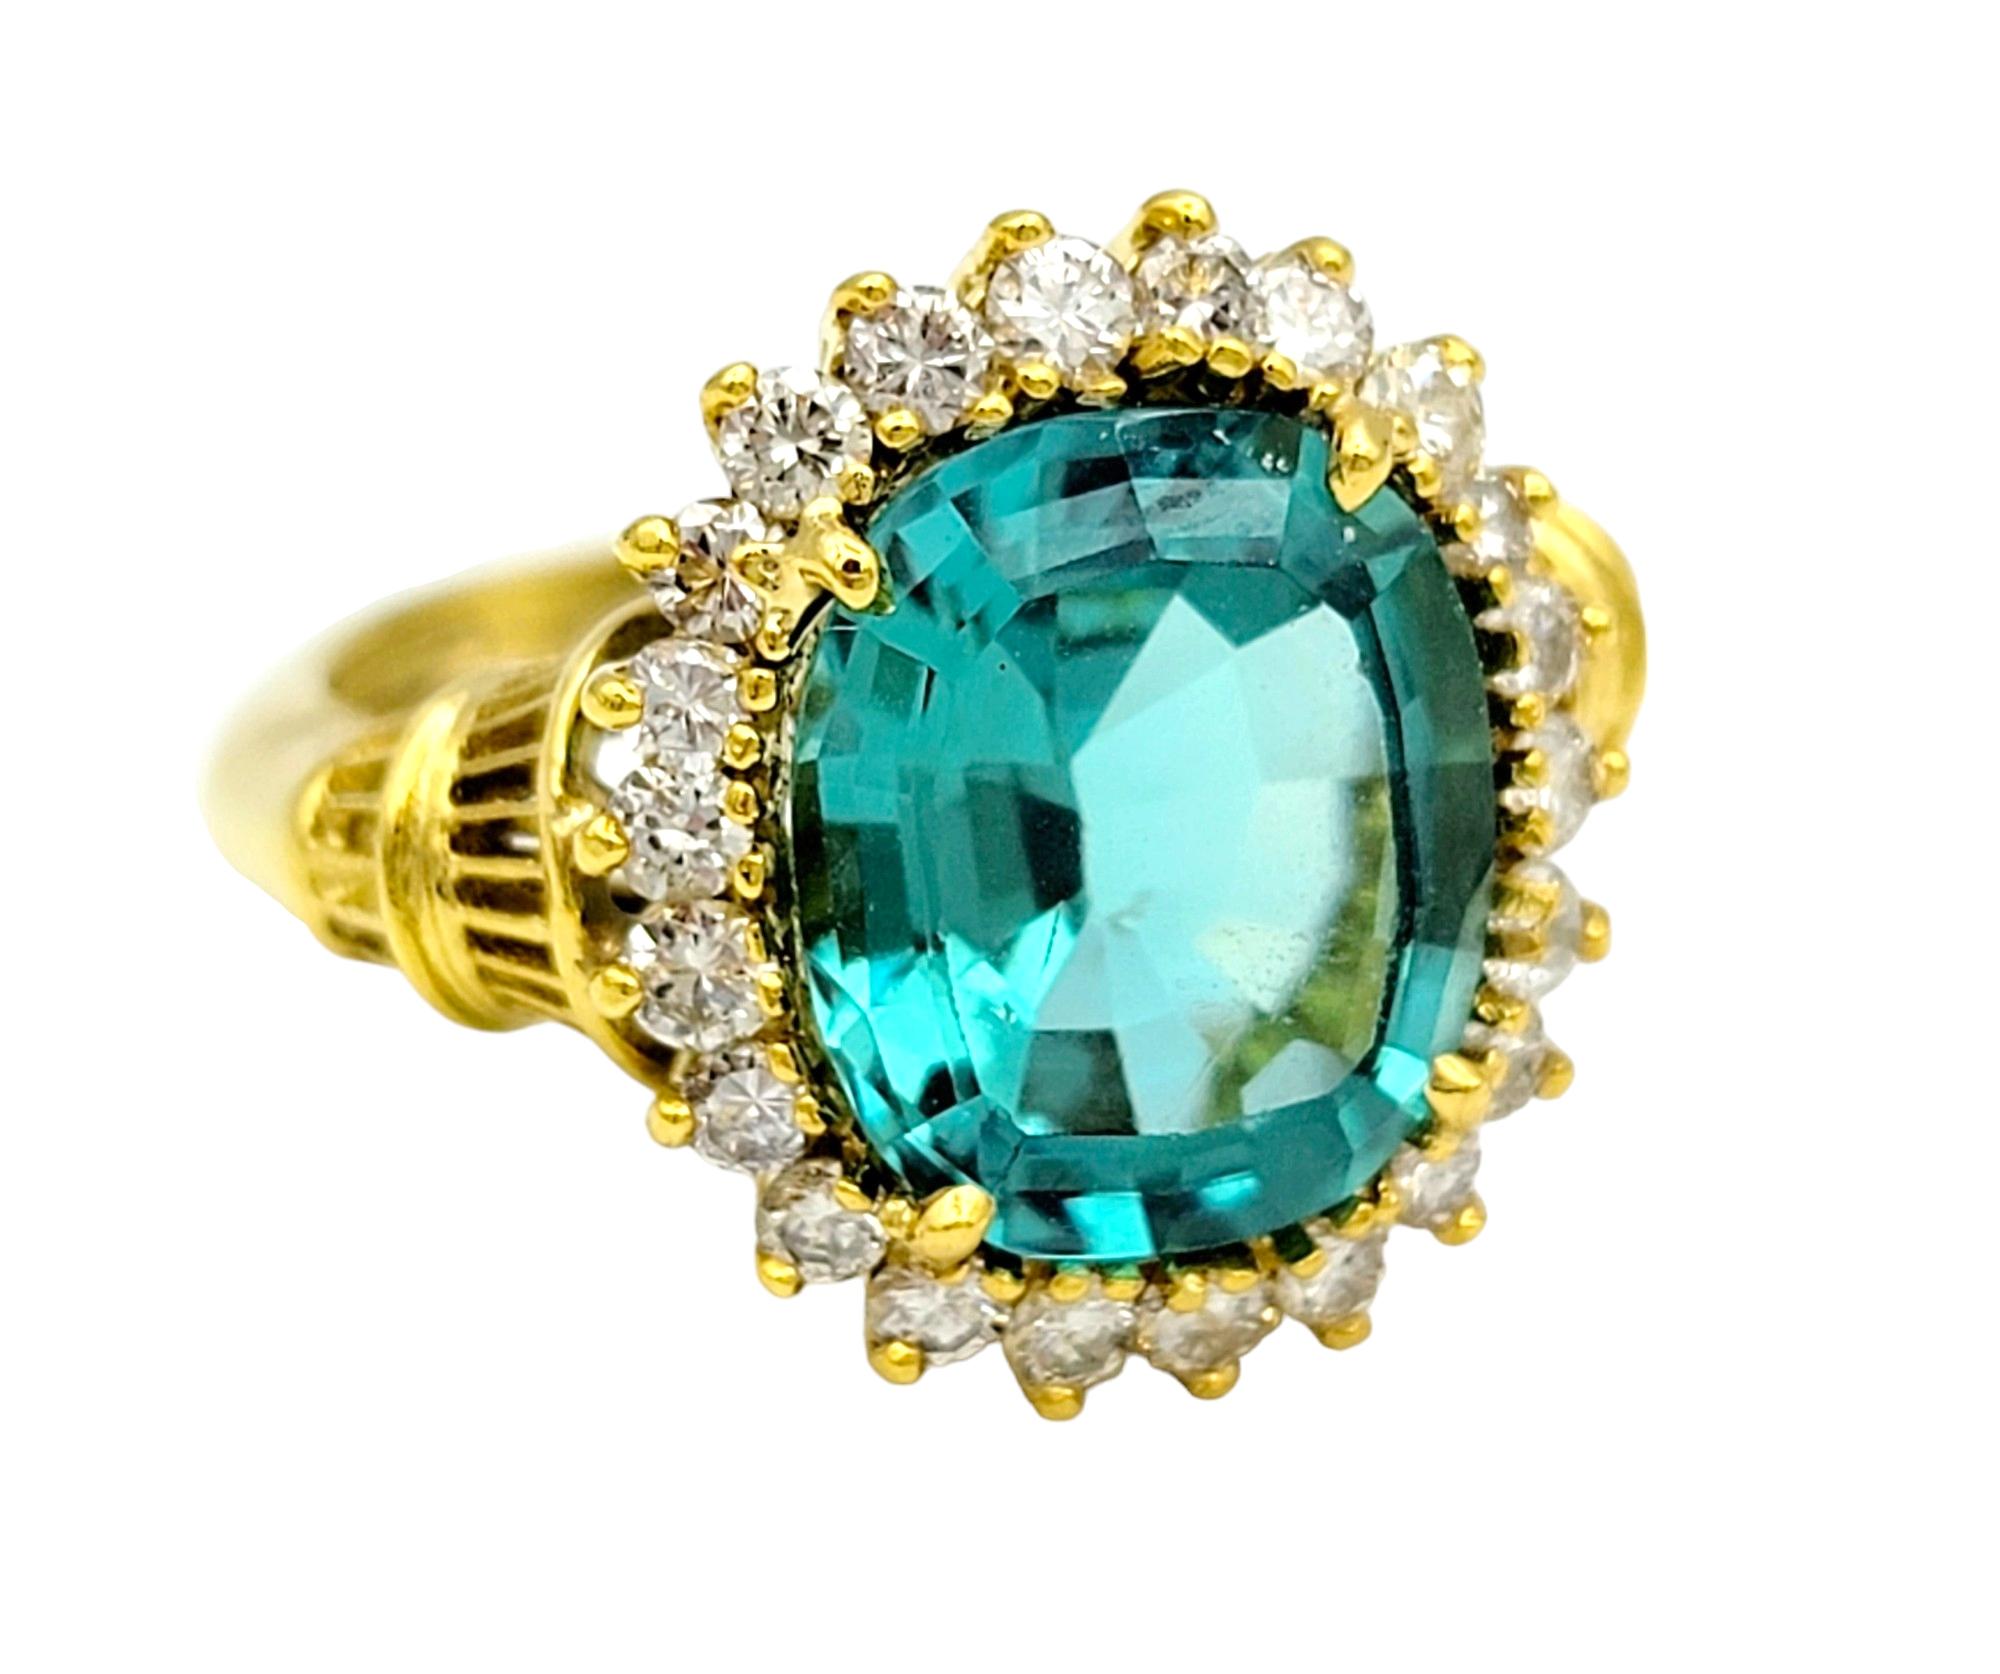 Rare 3.0 Carat Oval Cut Indicolite Tourmaline Ring with Diamond Halo in 18K Gold In Good Condition For Sale In Scottsdale, AZ